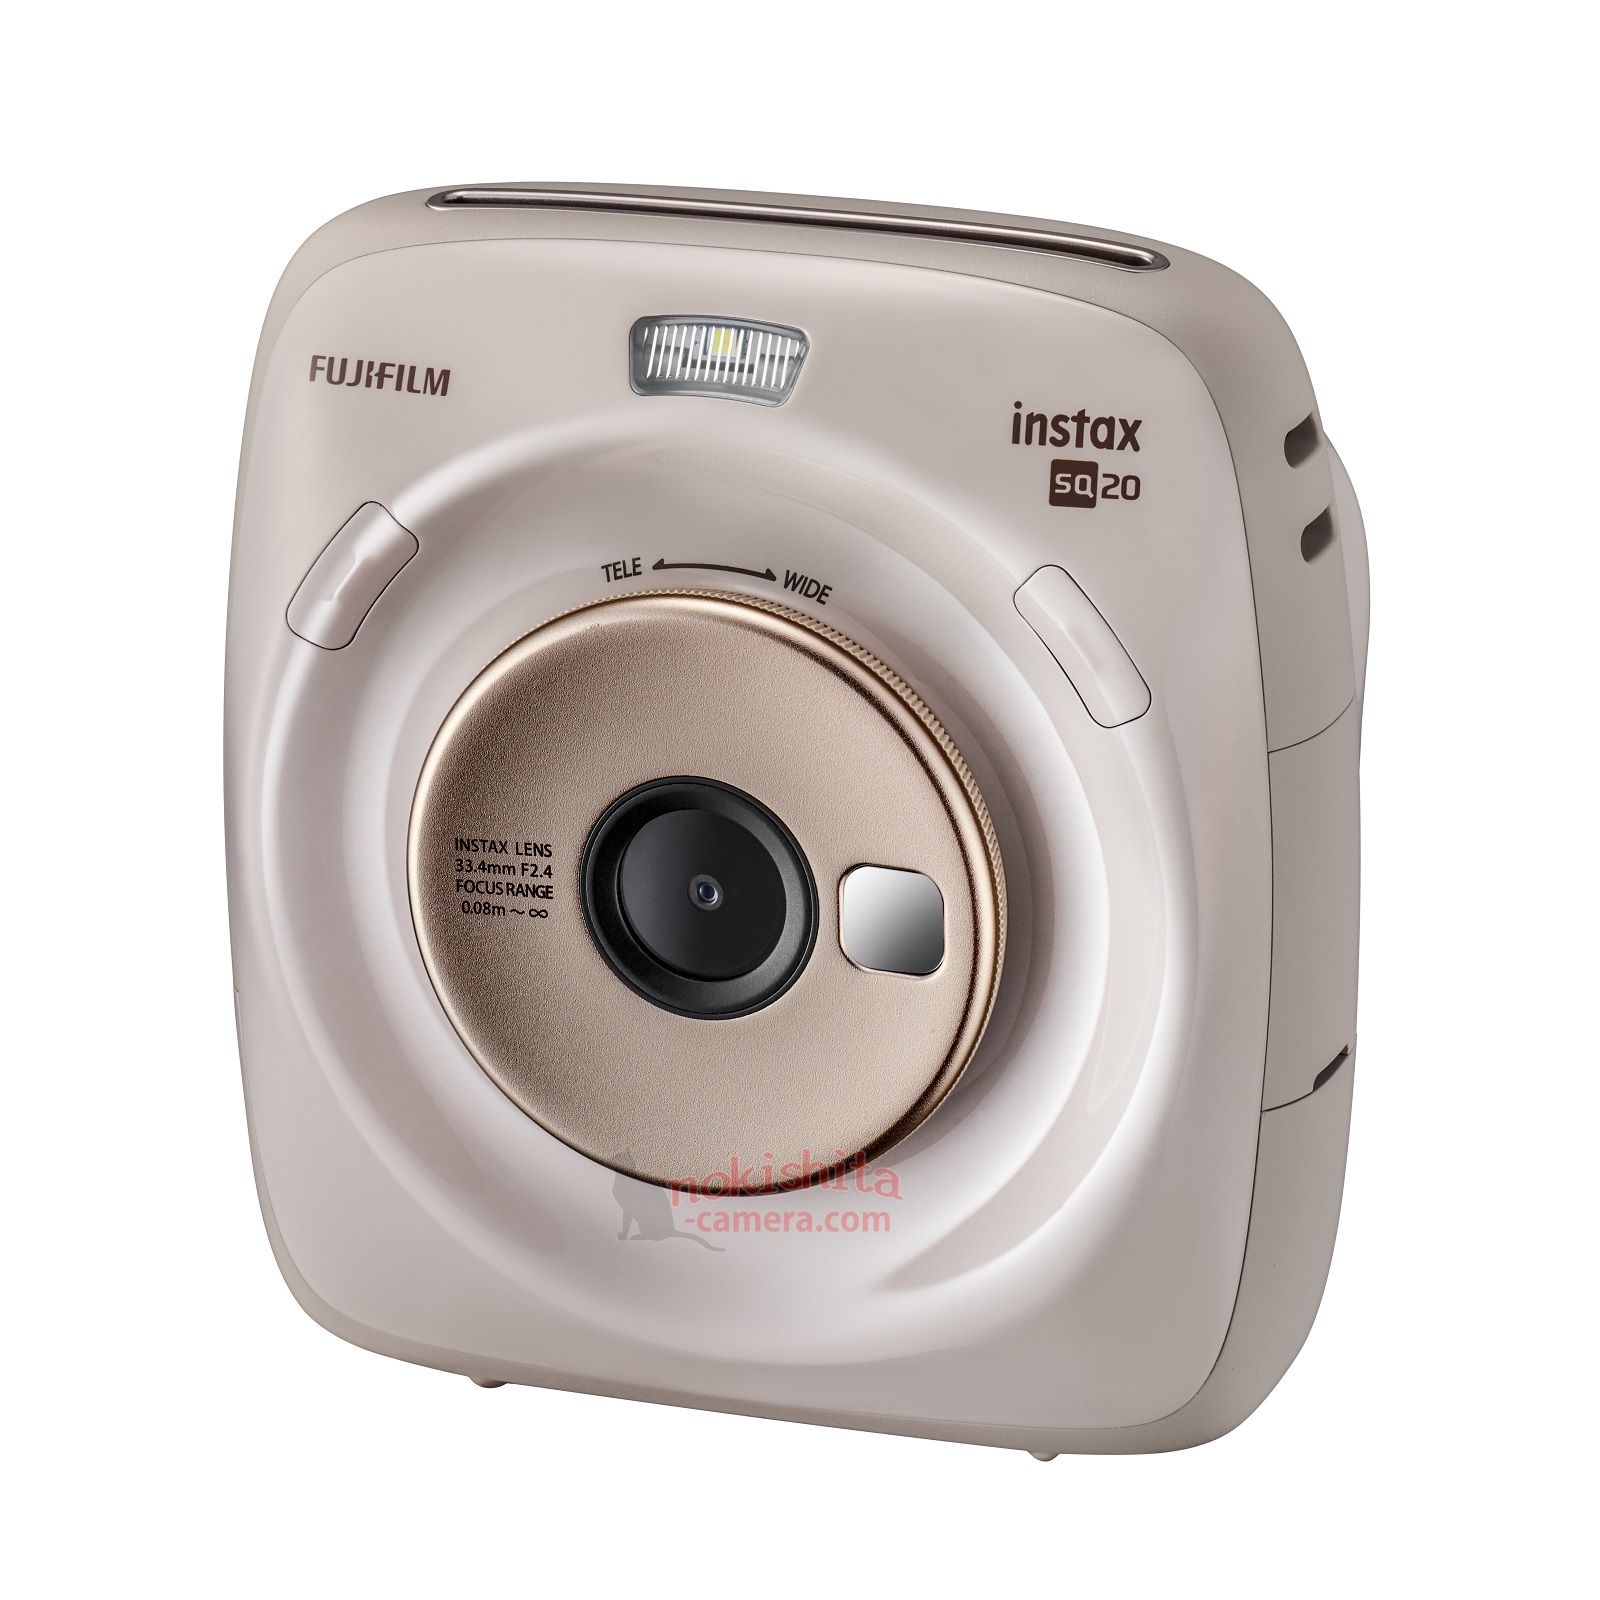 New Fuji Instax Square SQ 20 hybrid instant camera leaked online